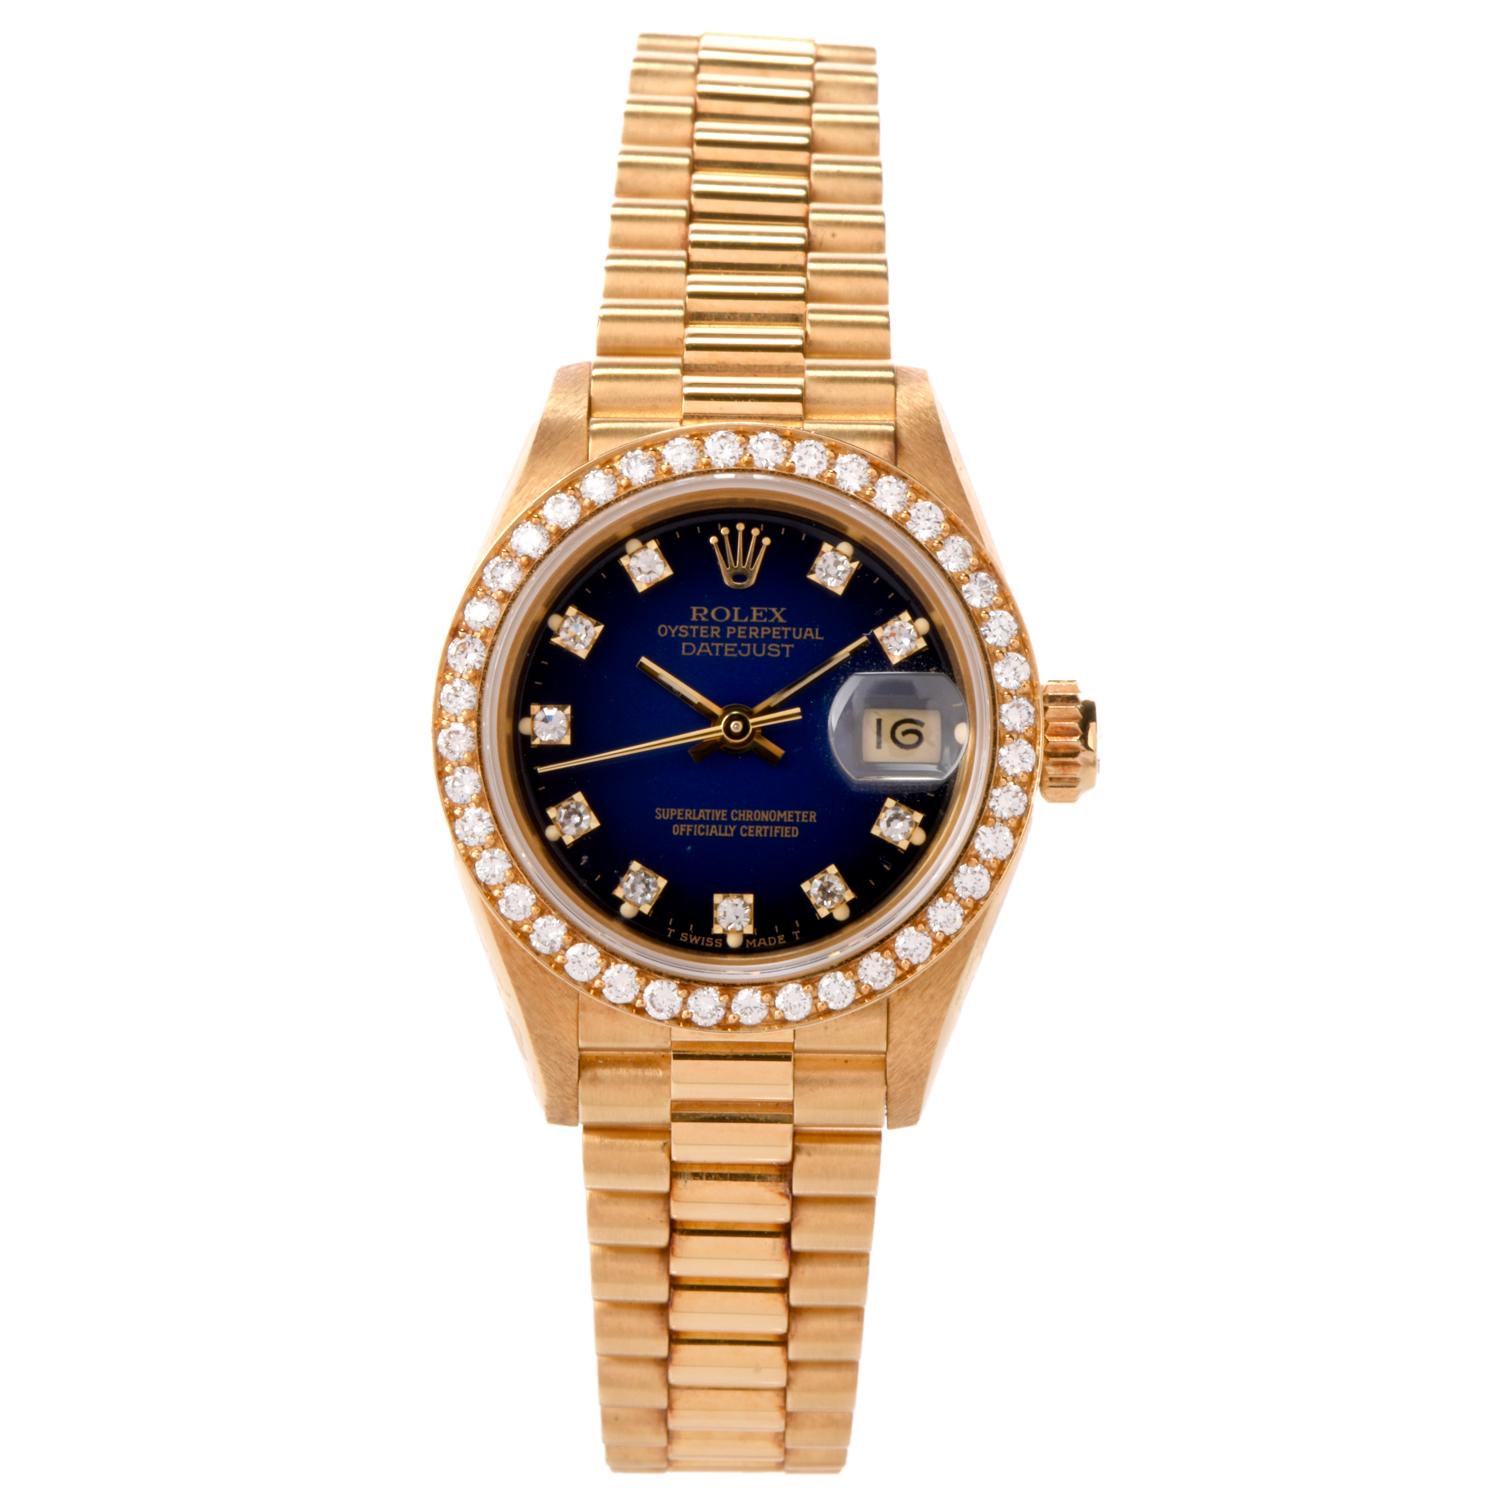 Ladies Rolex  28 mm ref 69138 

18k yellow gold case Rare Rolex Blue Dial with Factory set Diamond bezel with diamond dial with luminous hands. 

 Date display at 3 o'clock position, quickset date function. 

Sapphire crystal glassl, original 18k